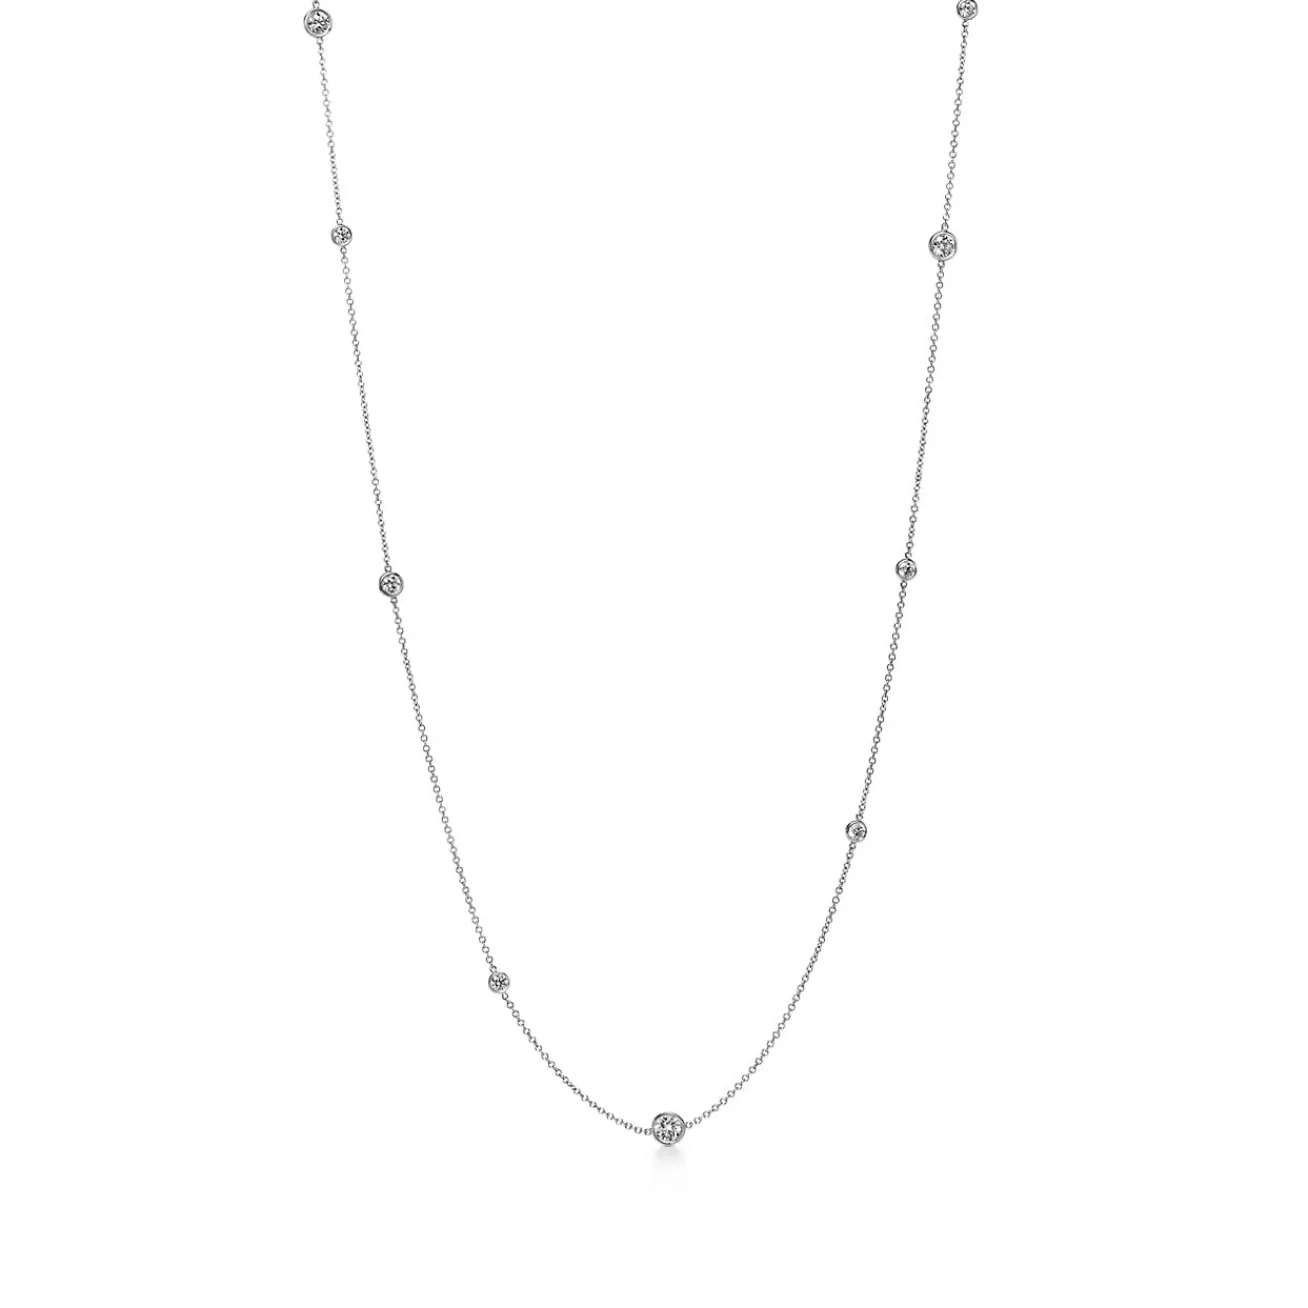 Tiffany & Co. Elsa Peretti® Diamonds by the Yard® Sprinkle Necklace in Platinum with Diamonds | ^ Necklaces & Pendants | Platinum Jewelry